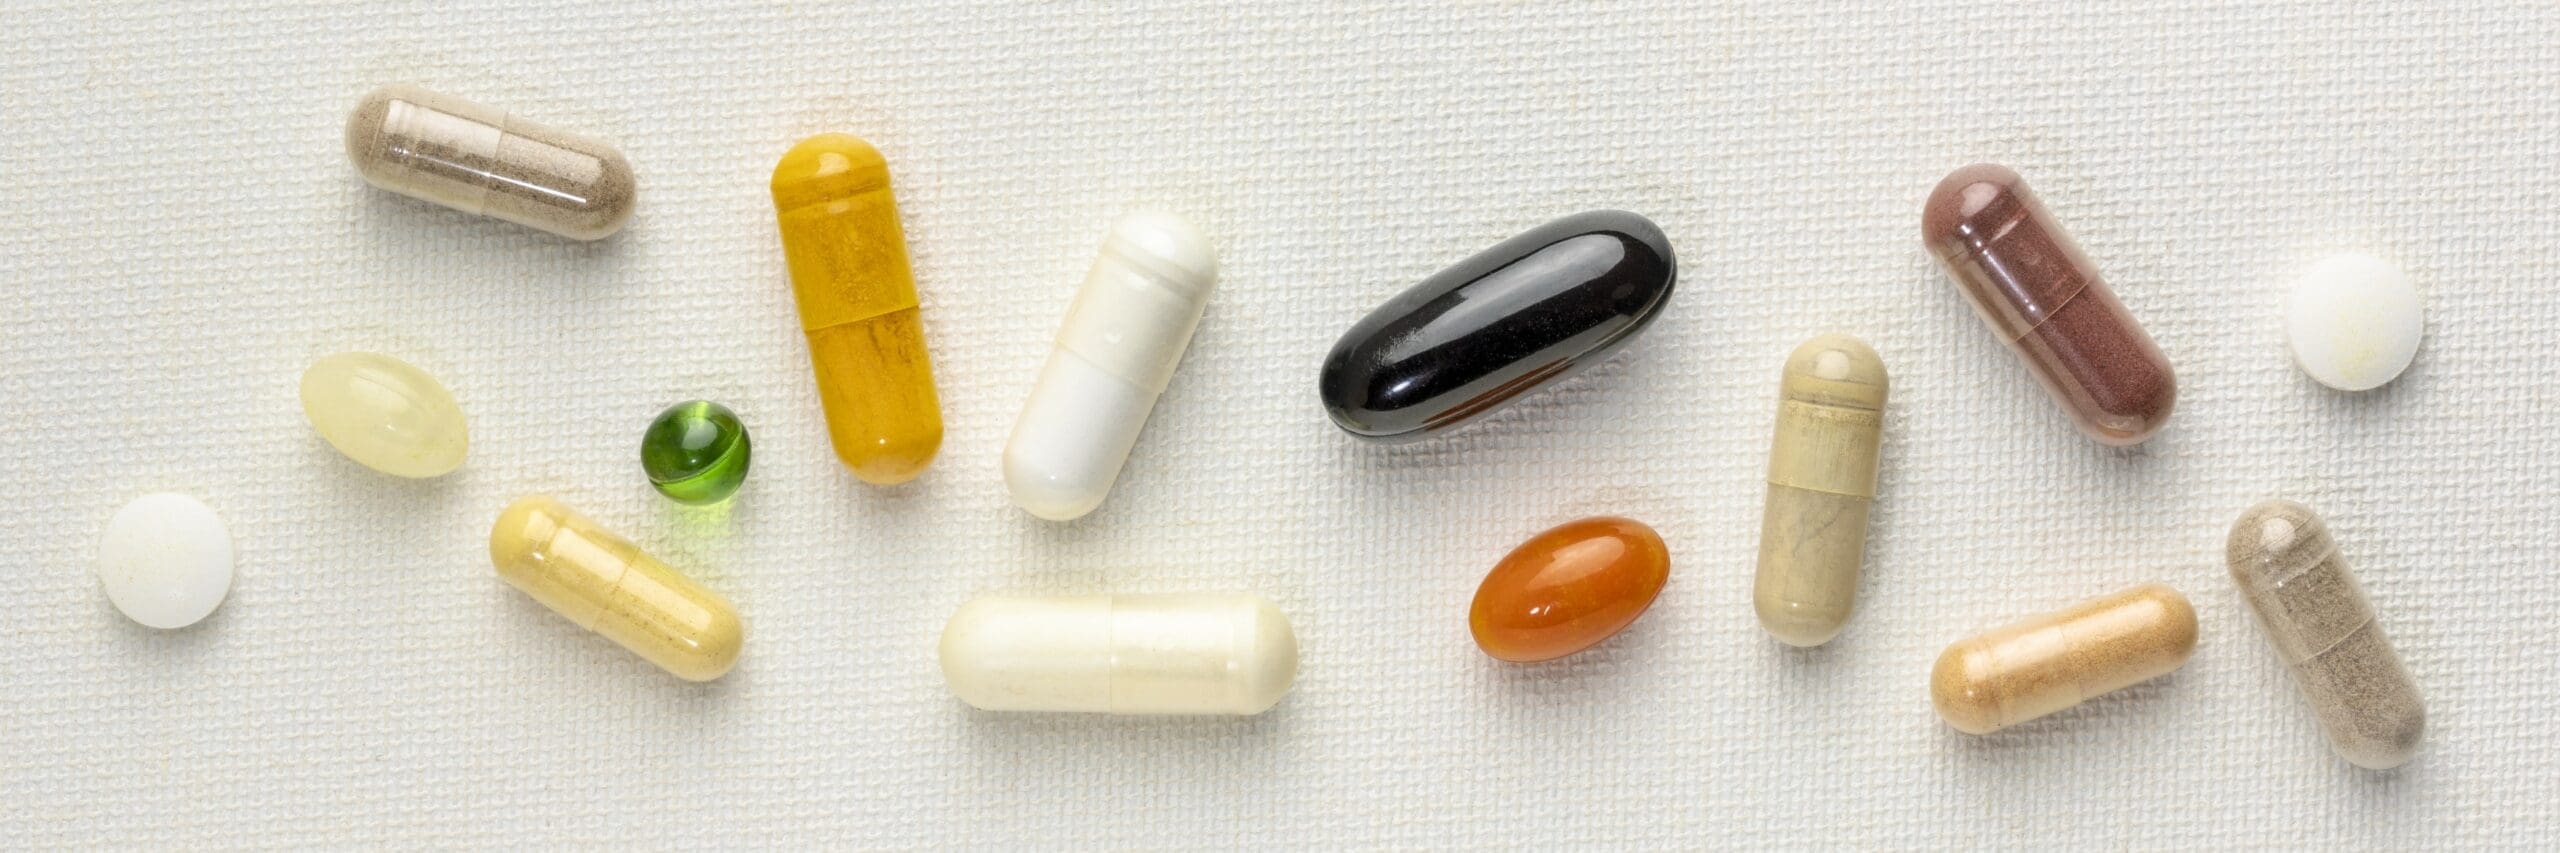 Vitamins and nutritional supplements